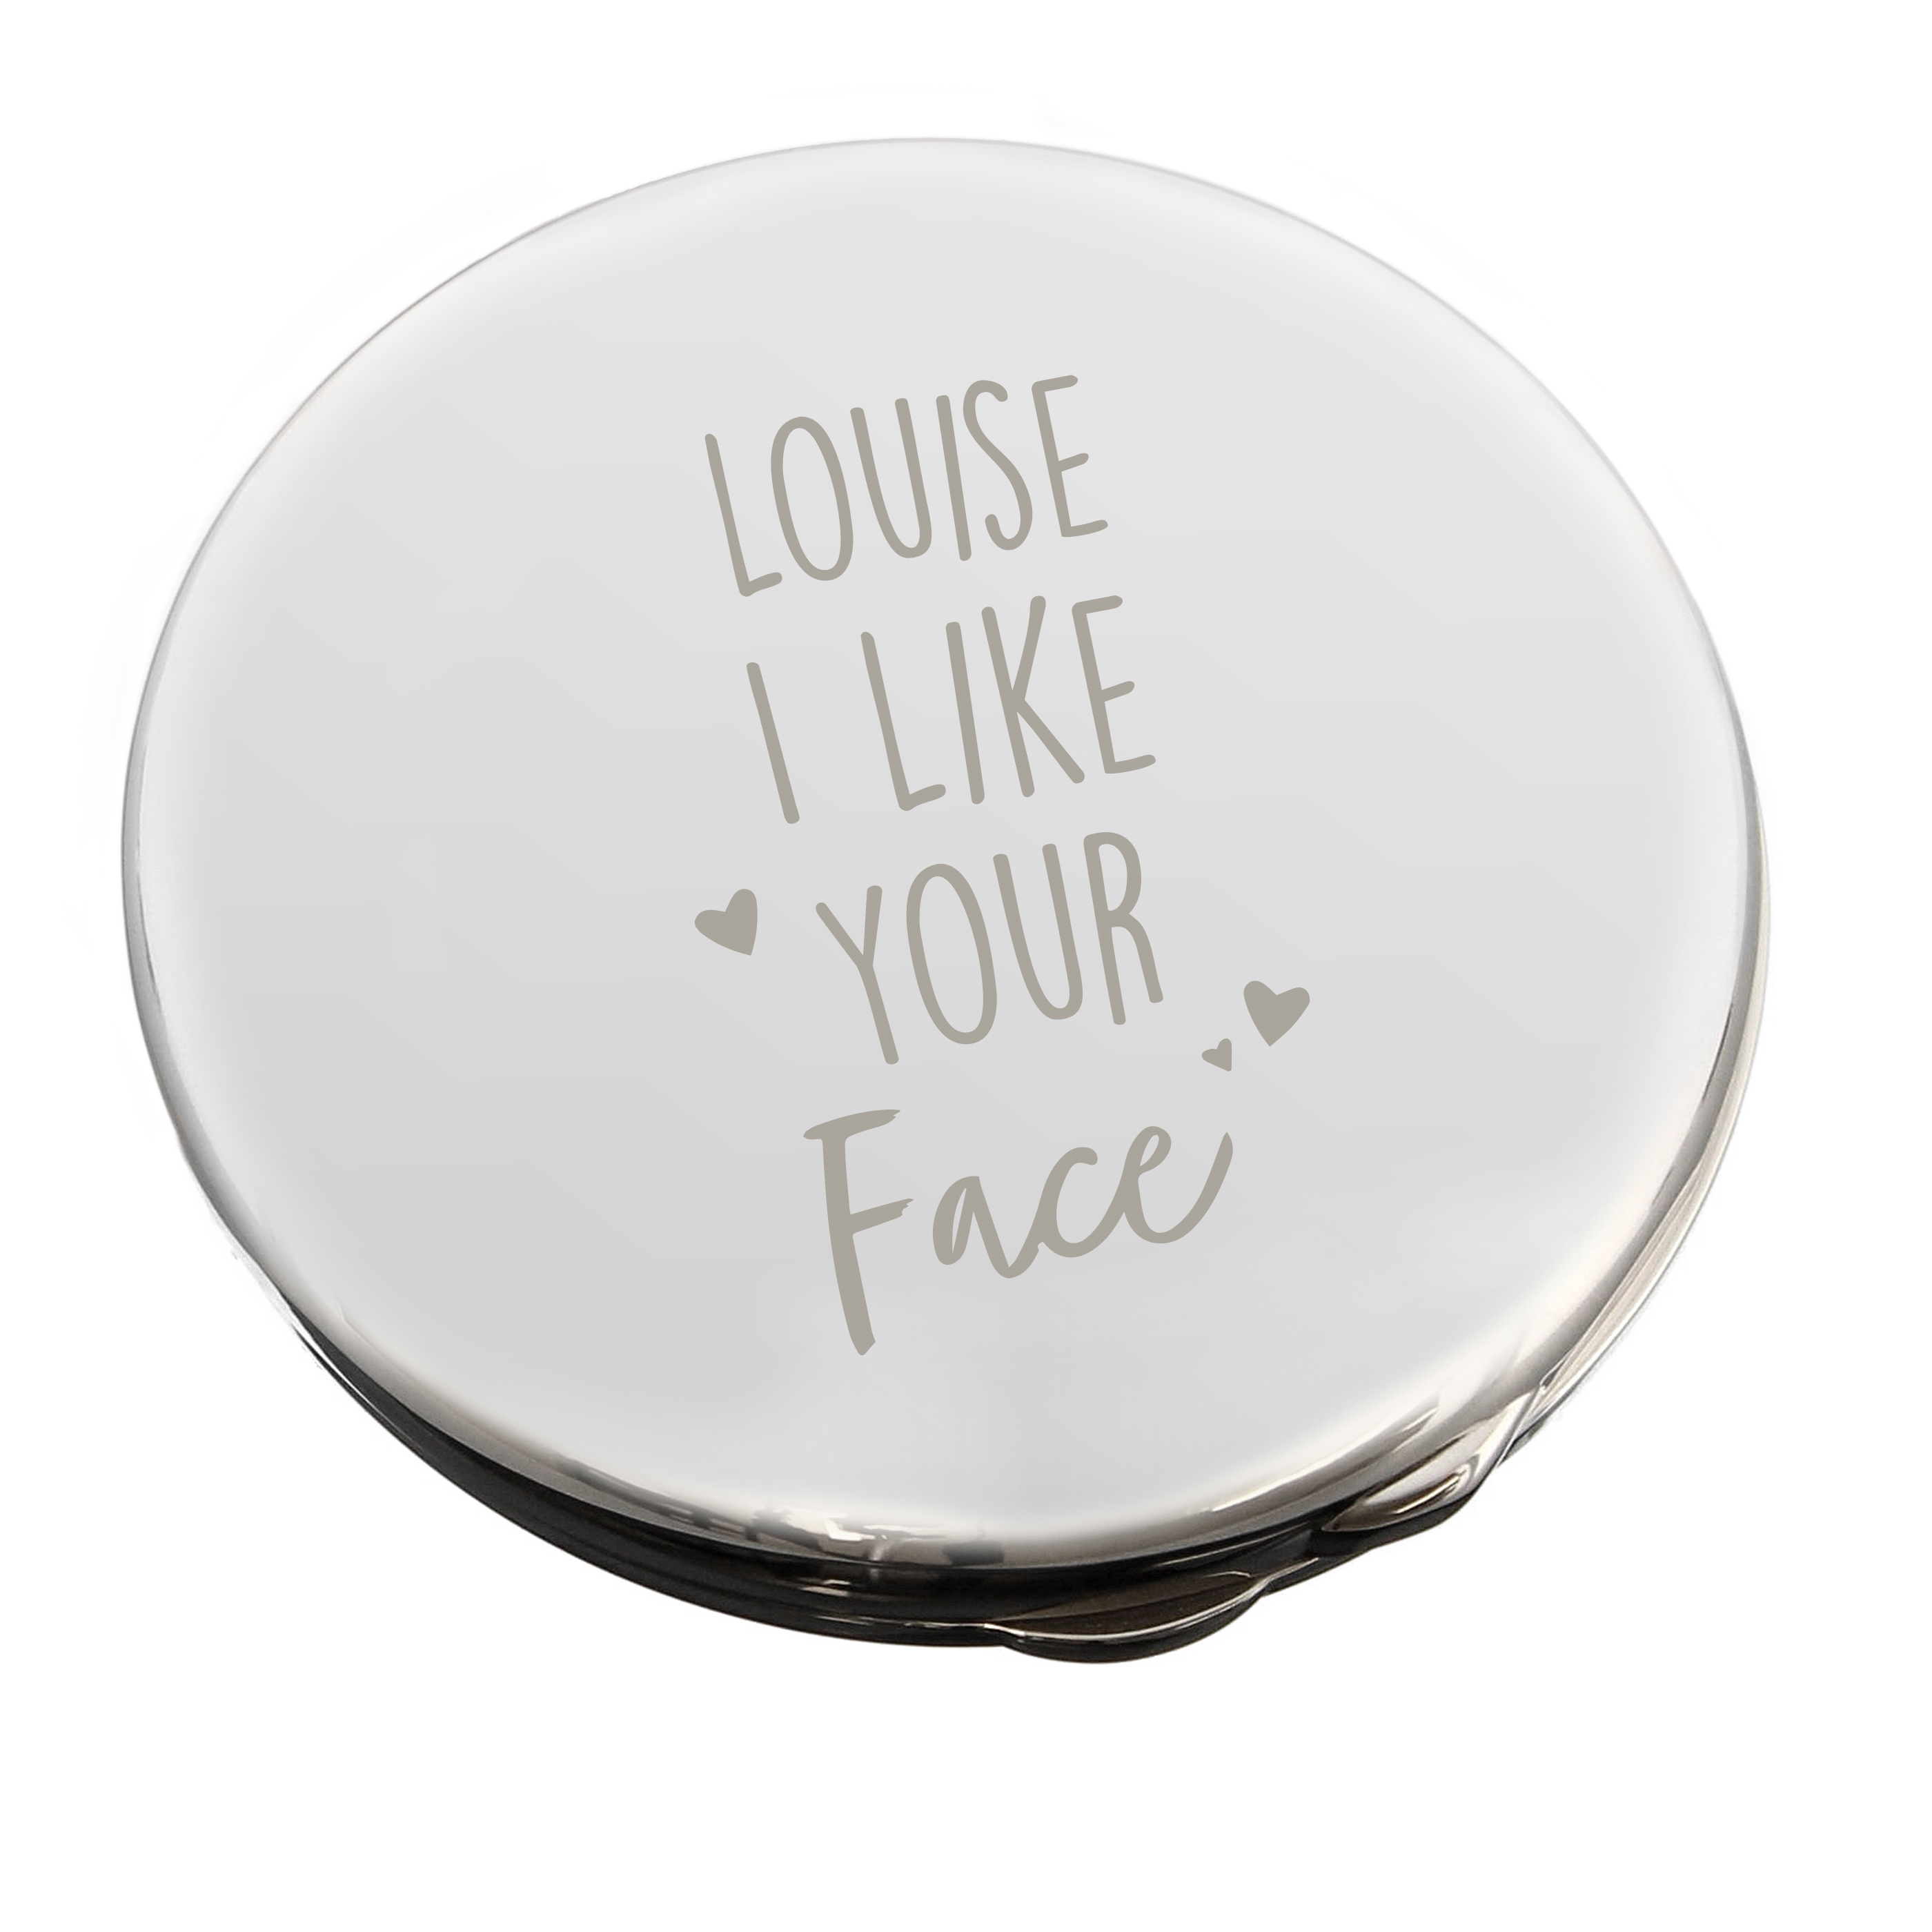 Personalised Compact Mirror - I Like Your Face